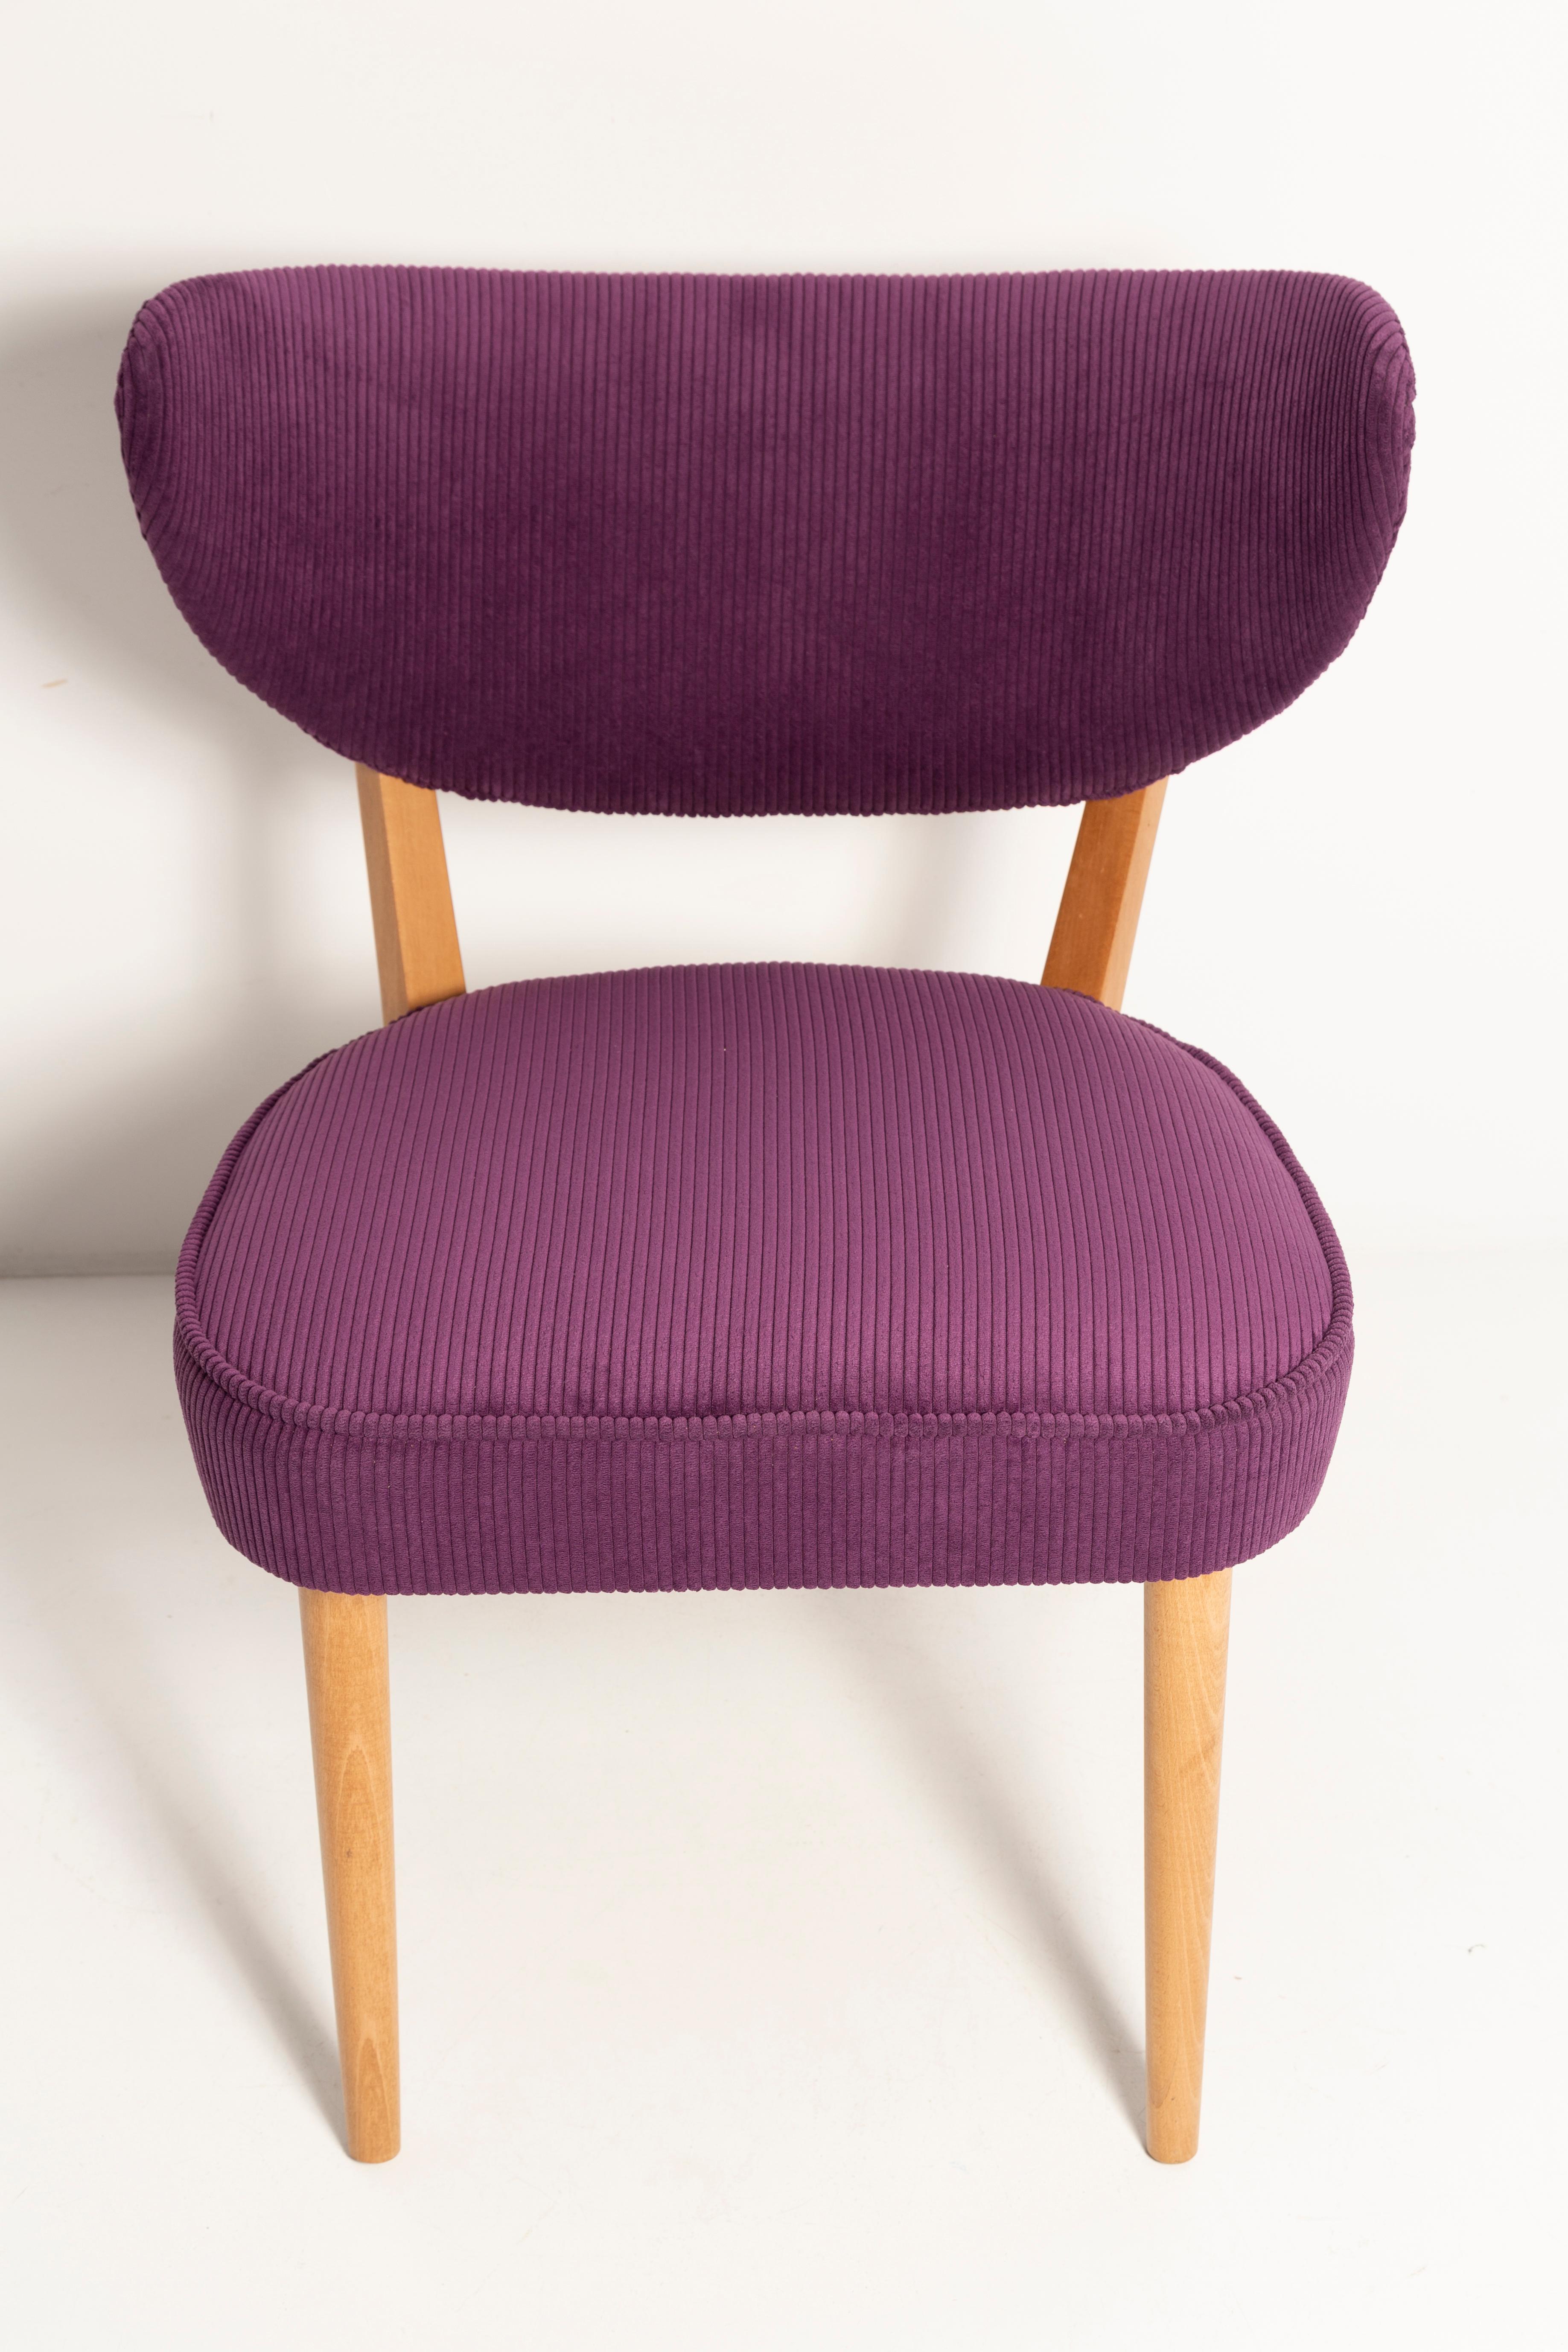 Midcentury Style Violet Velvet Club Chair, by Vintola Studio, Europe, Poland For Sale 6